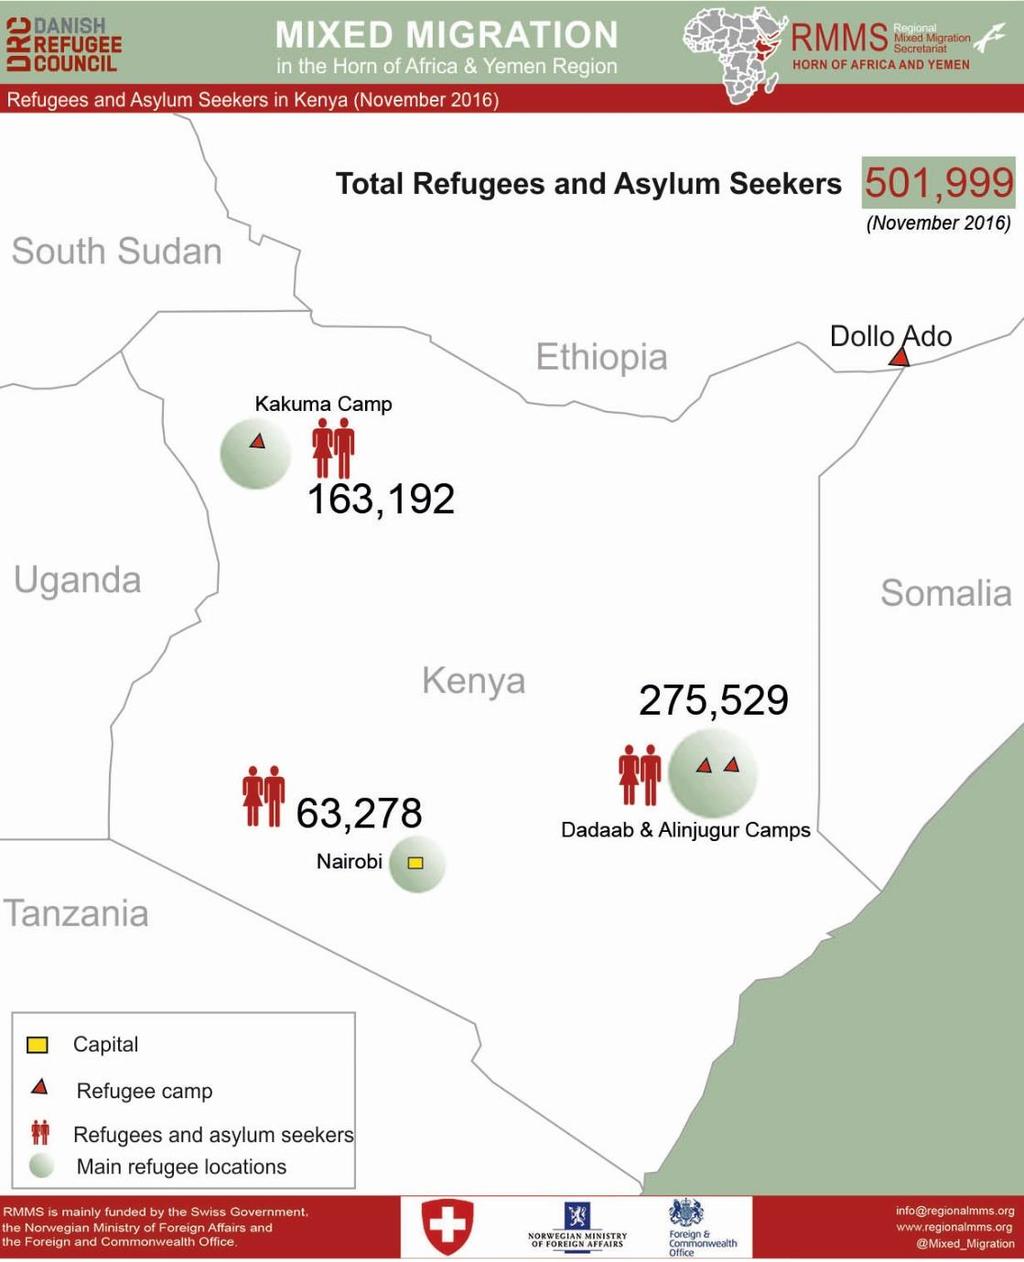 Two refugee camps, Kakuma in North West of Kenya and the Dadaab complex in the North East, host the largest number of refugees in Kenya with Dadaab and Alinjugur the